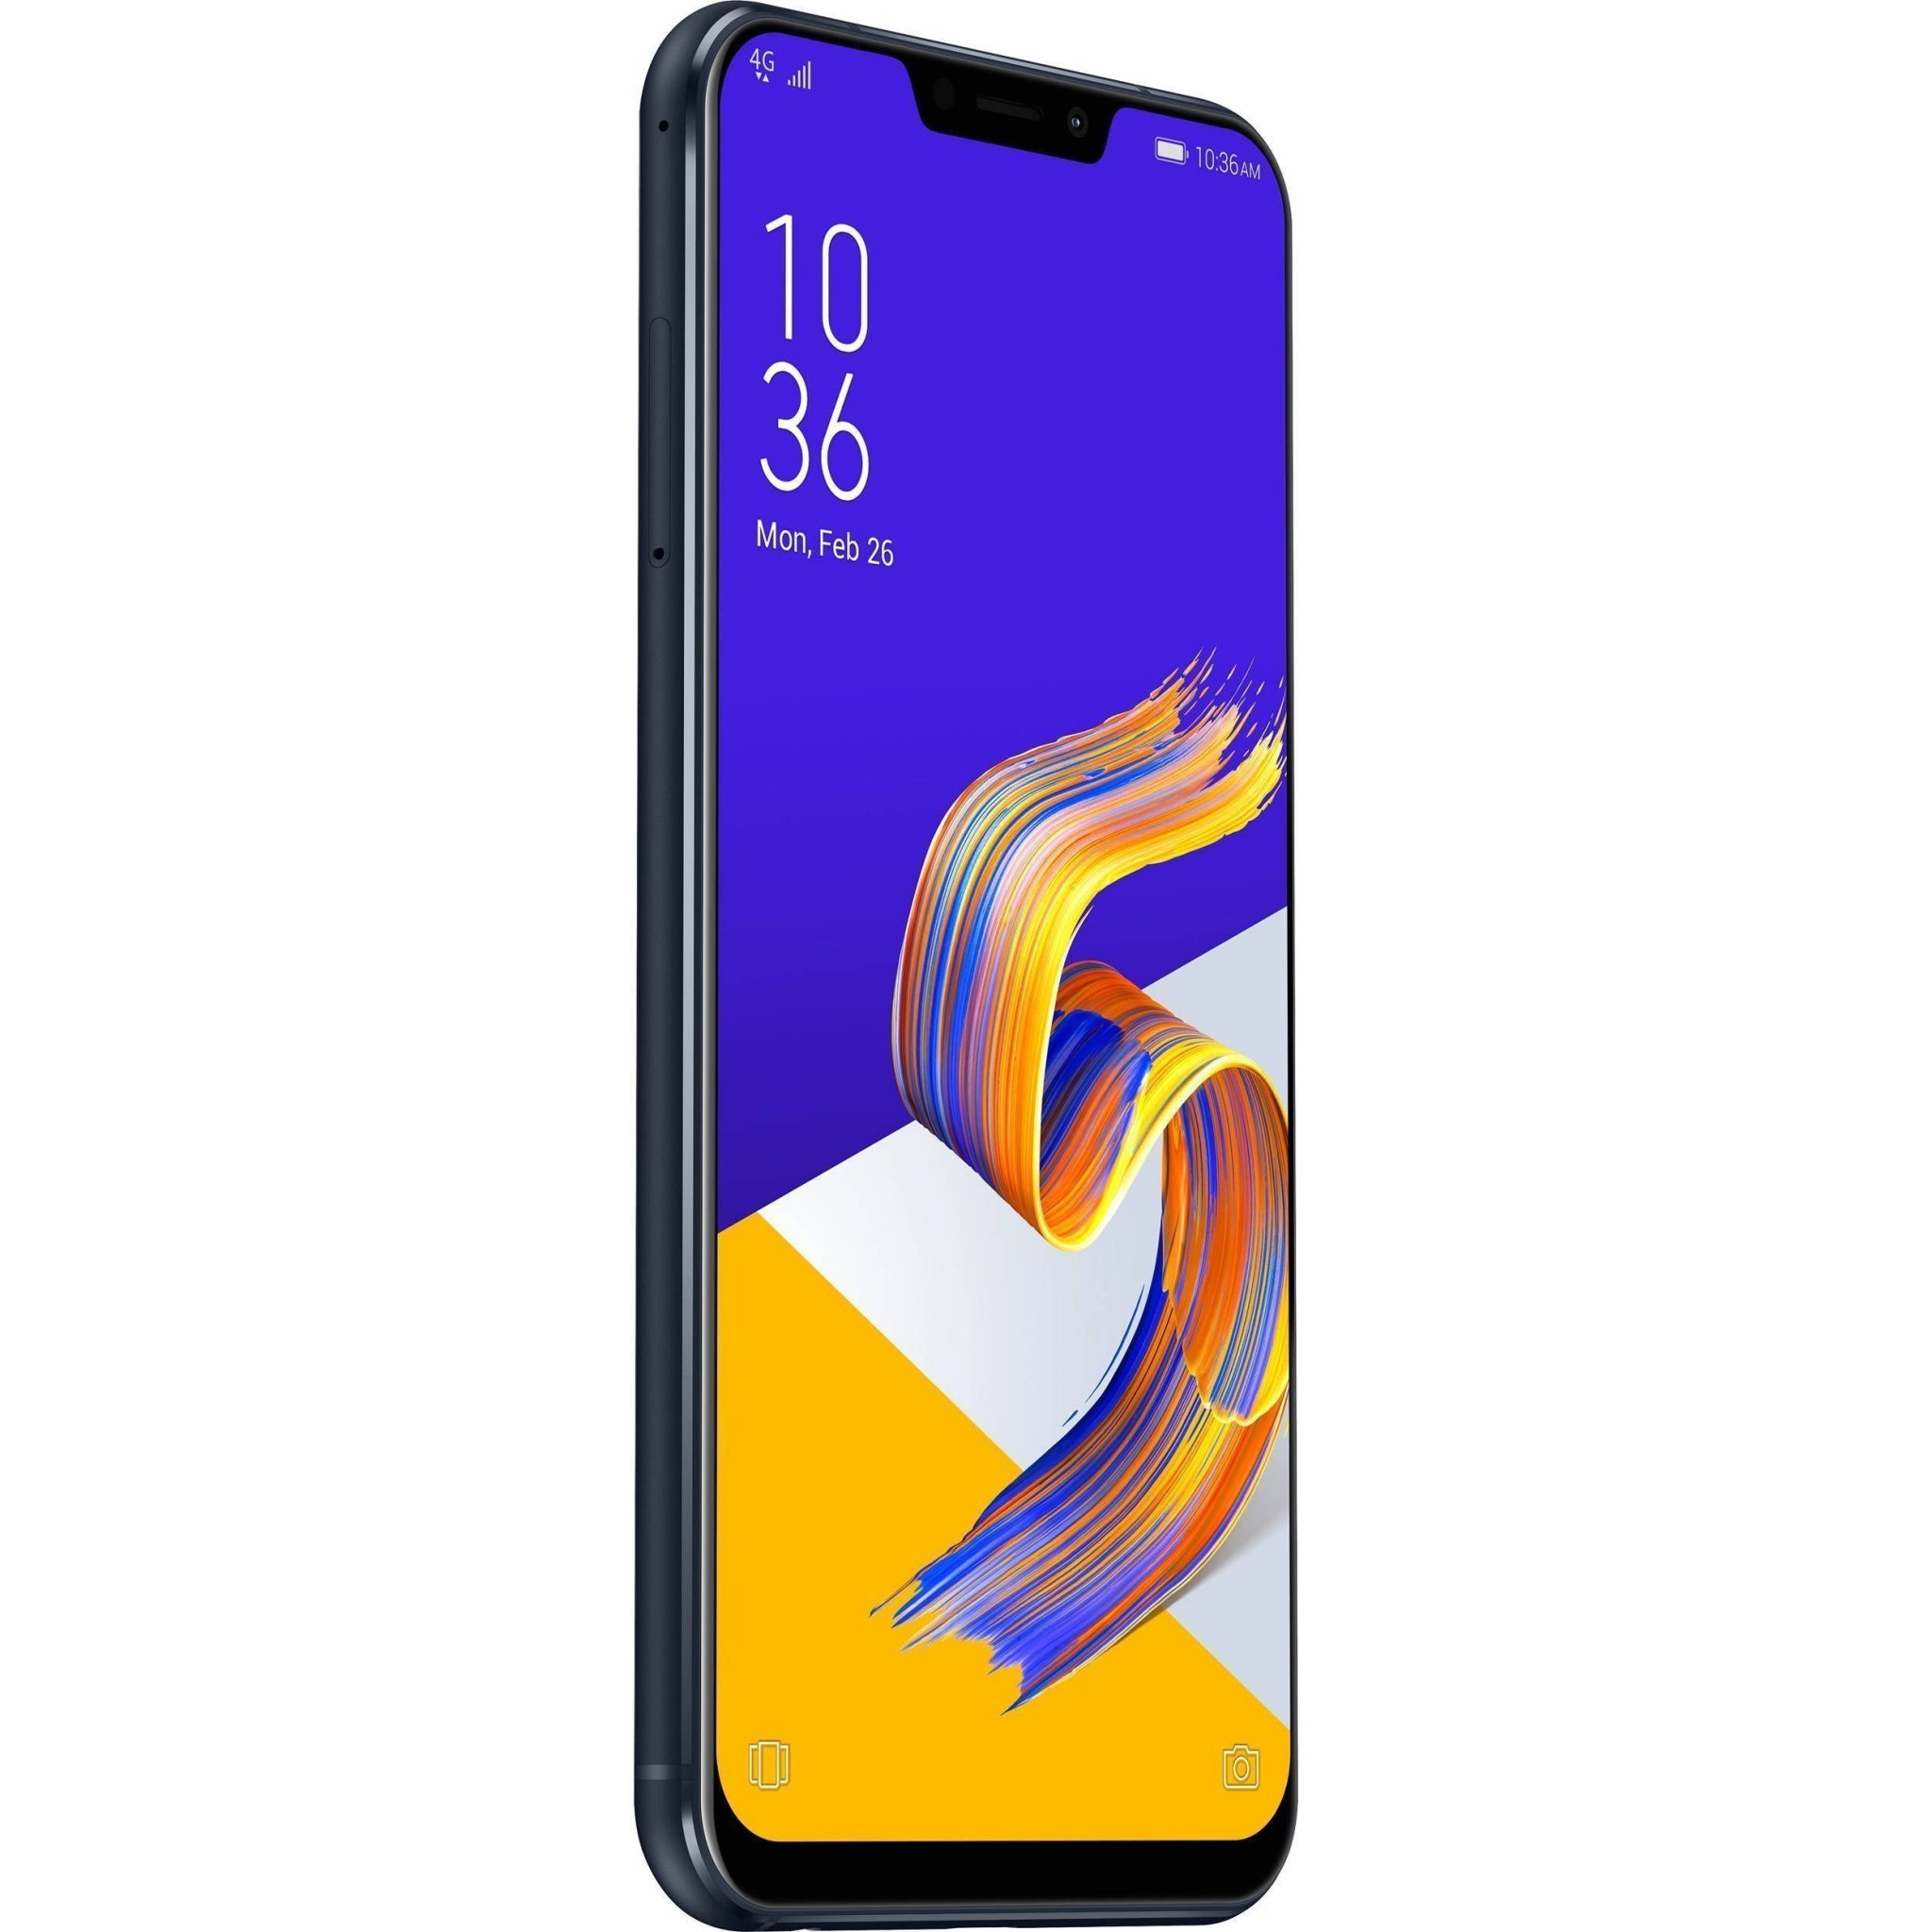 Update Zenfone 5Z to Android Pie based on Resurrection Remix 7.0